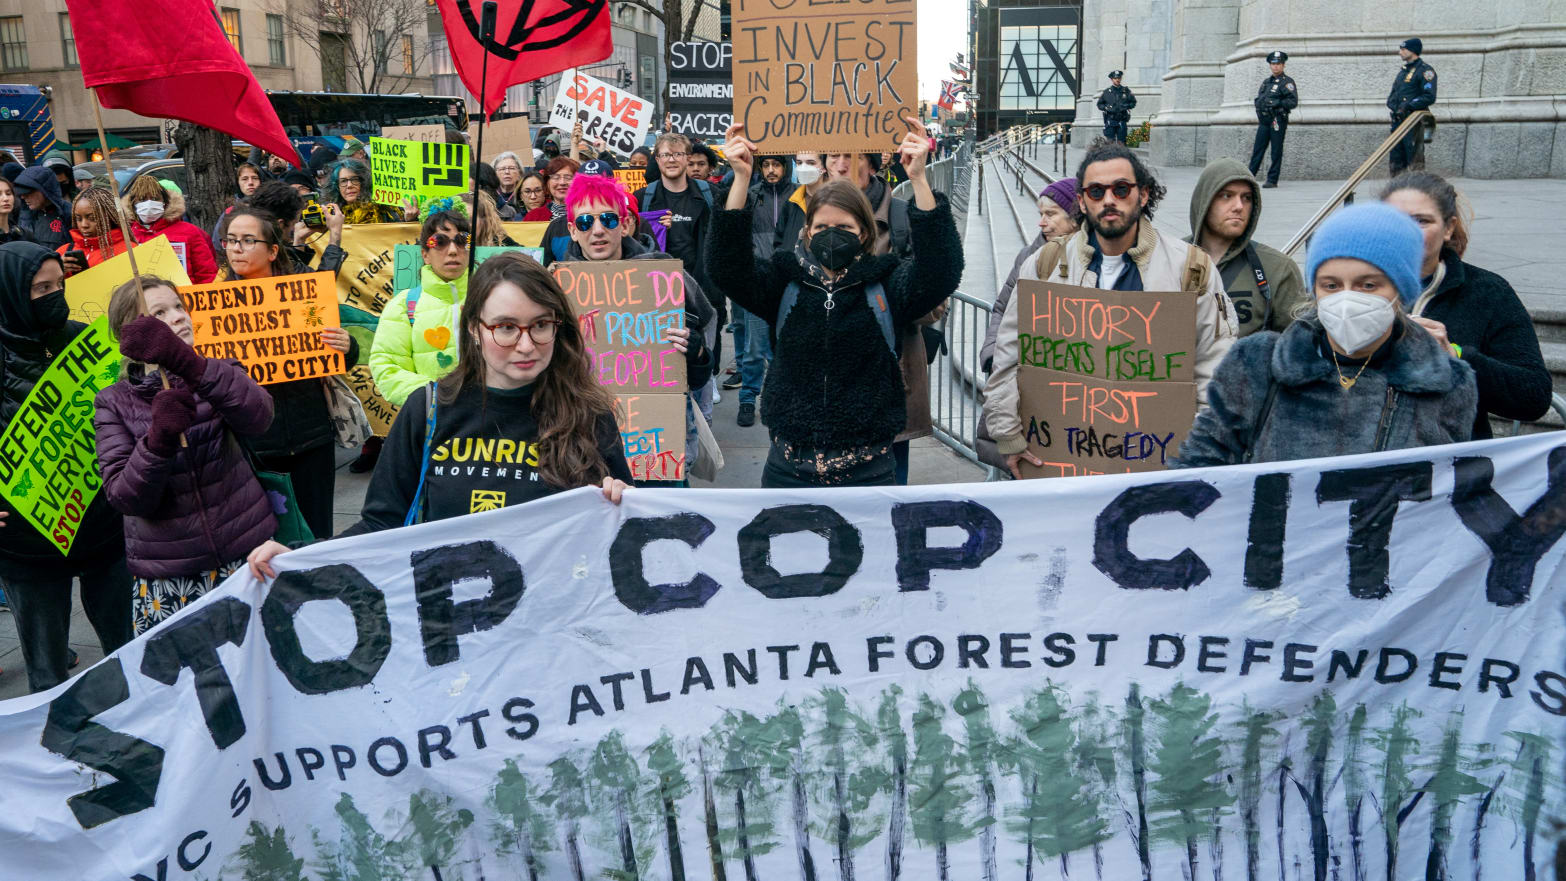 Protesters march against the construction of Cop City, a police training facility outside Atlanta, Georgia. 